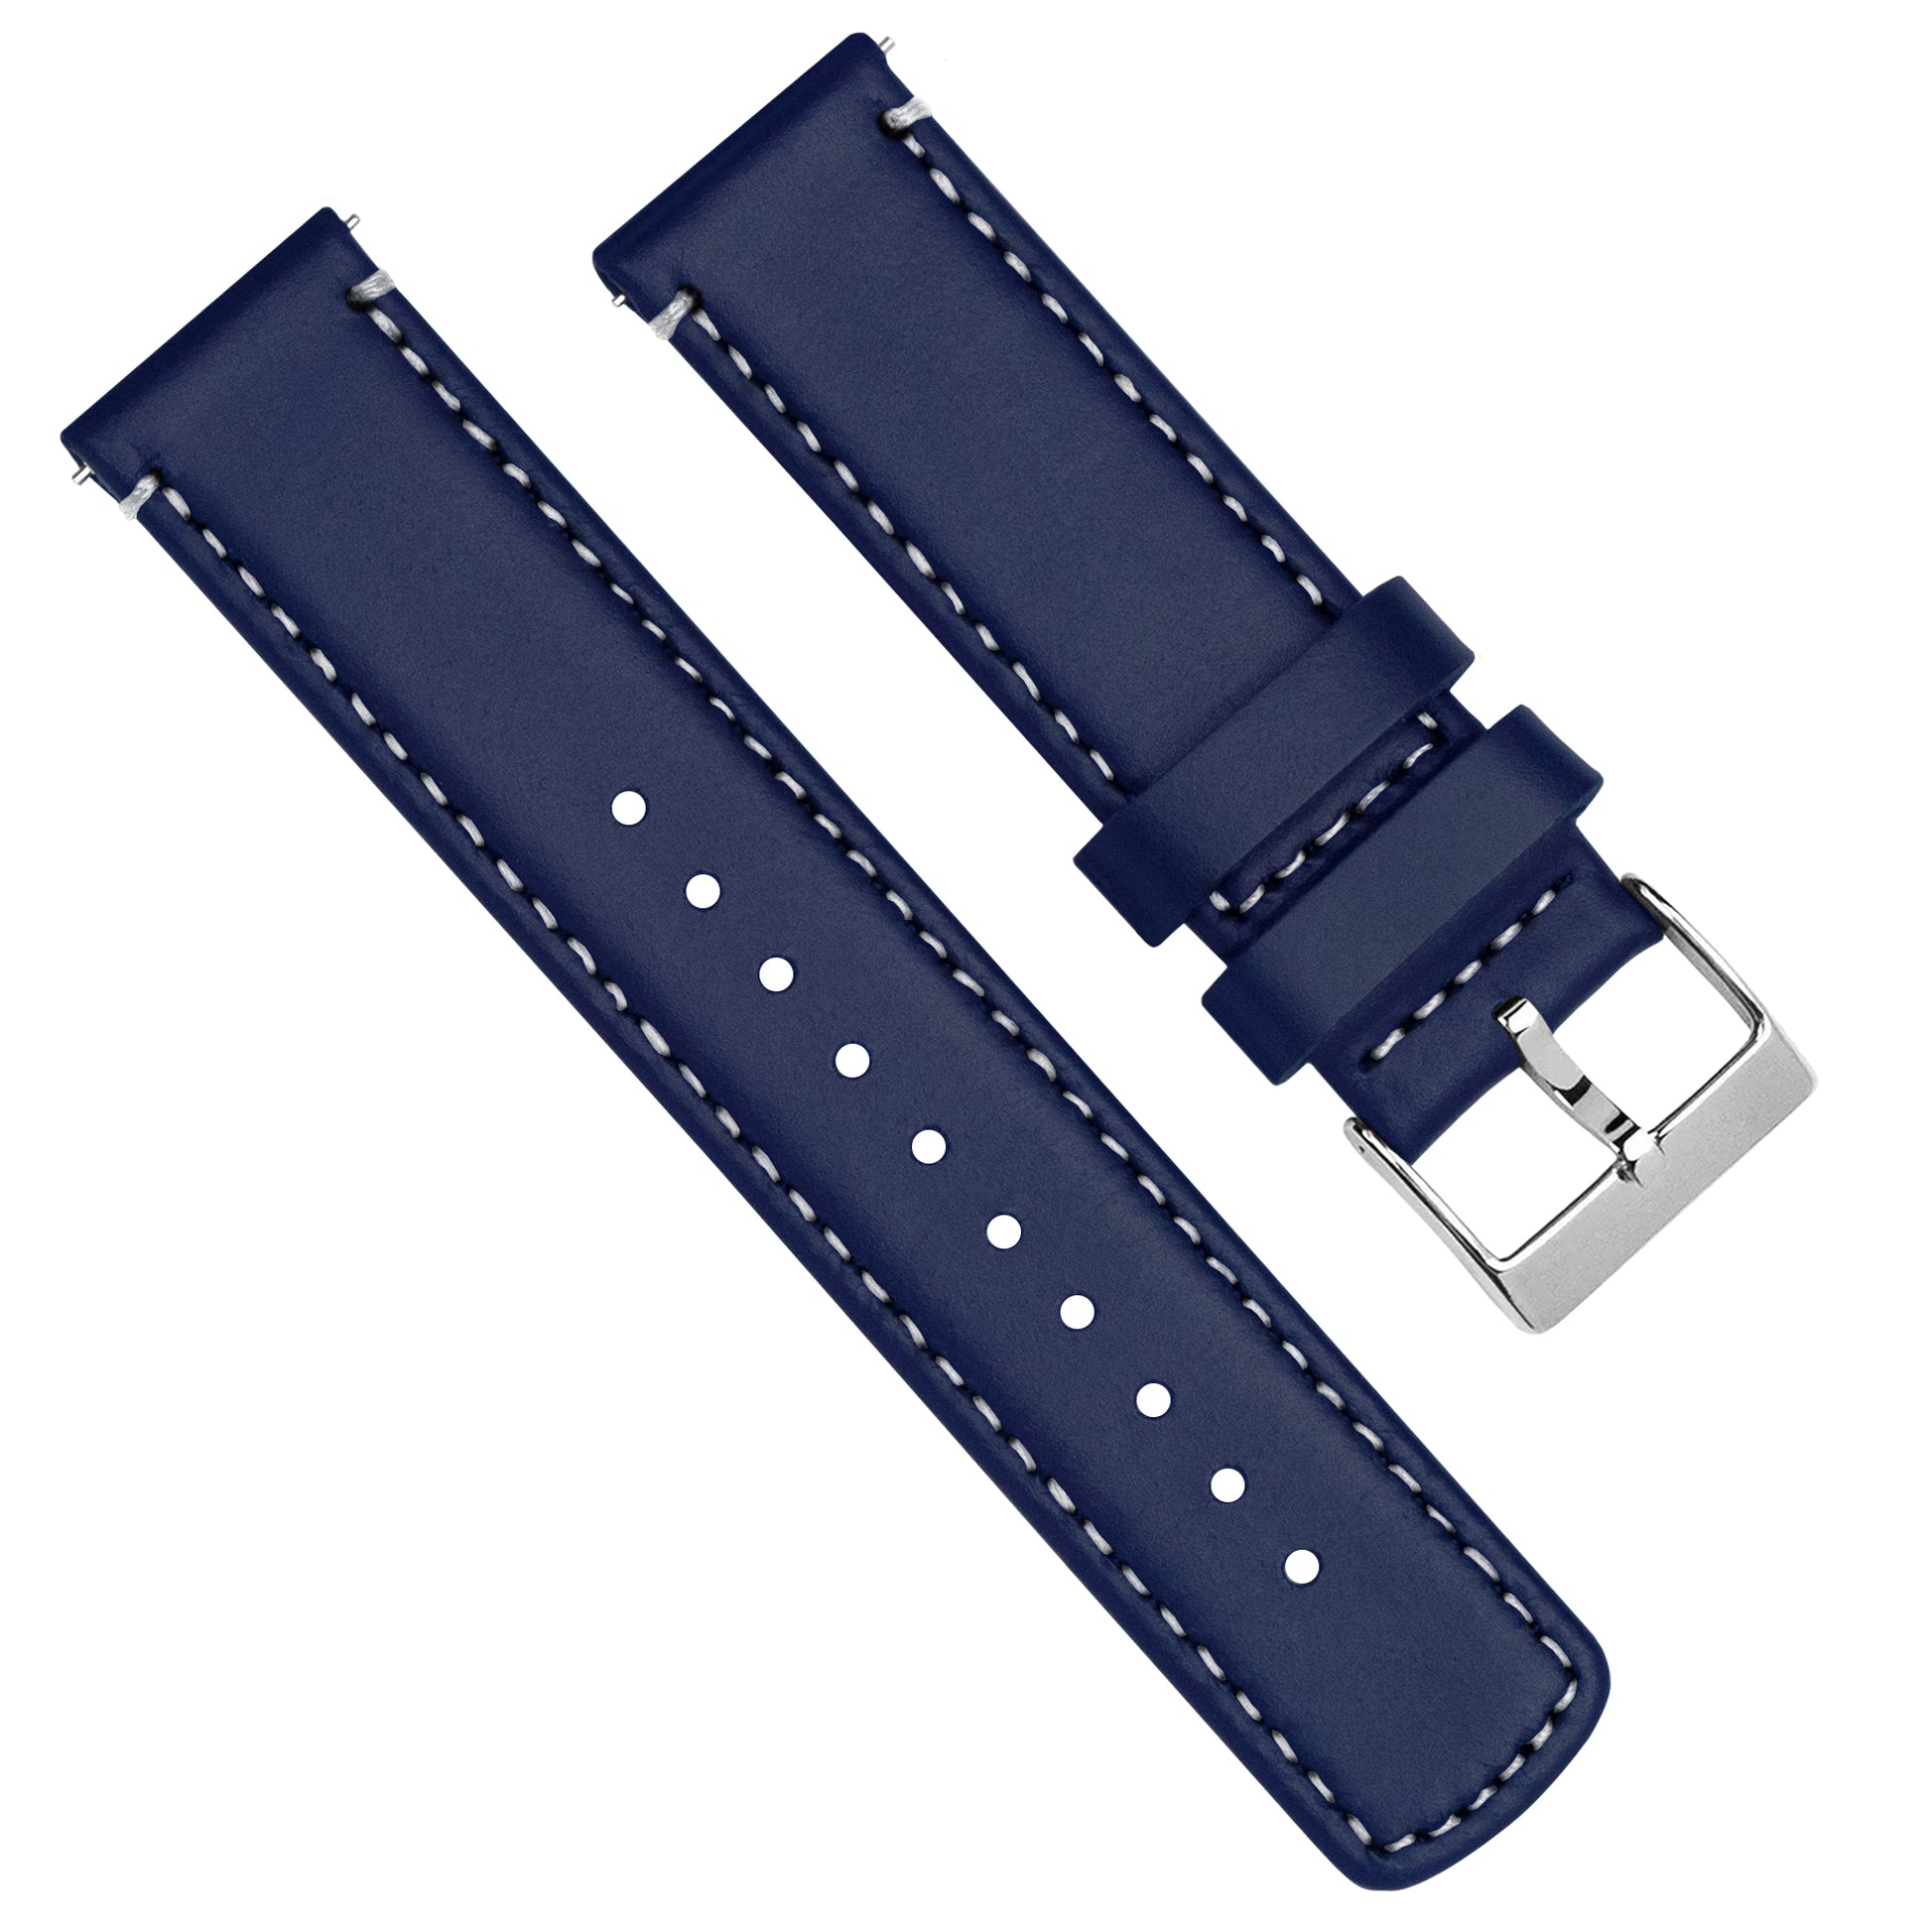 Pebble Smart Watches | Navy Blue Leather & Linen White Stitching - Barton Watch Bands